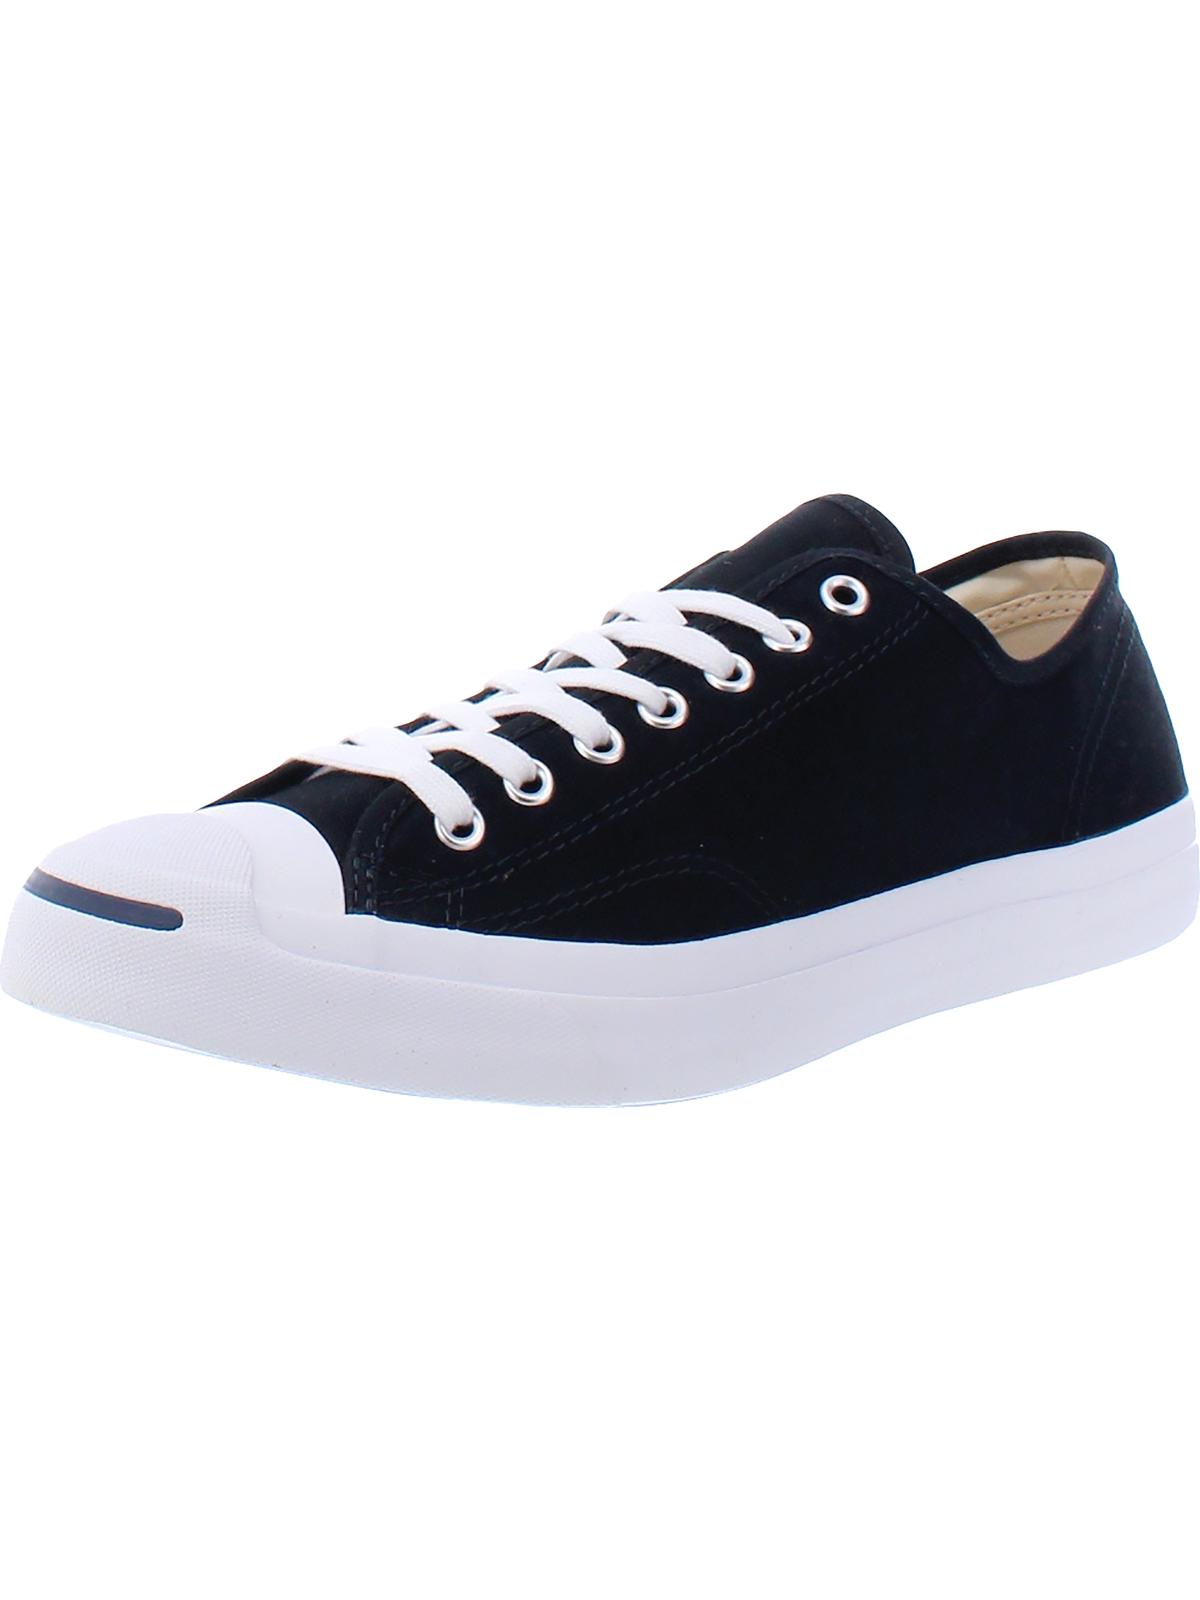 Converse Mens Jack Purcell Canvas Canvas Low Top Fashion Sneakers - image 1 of 3